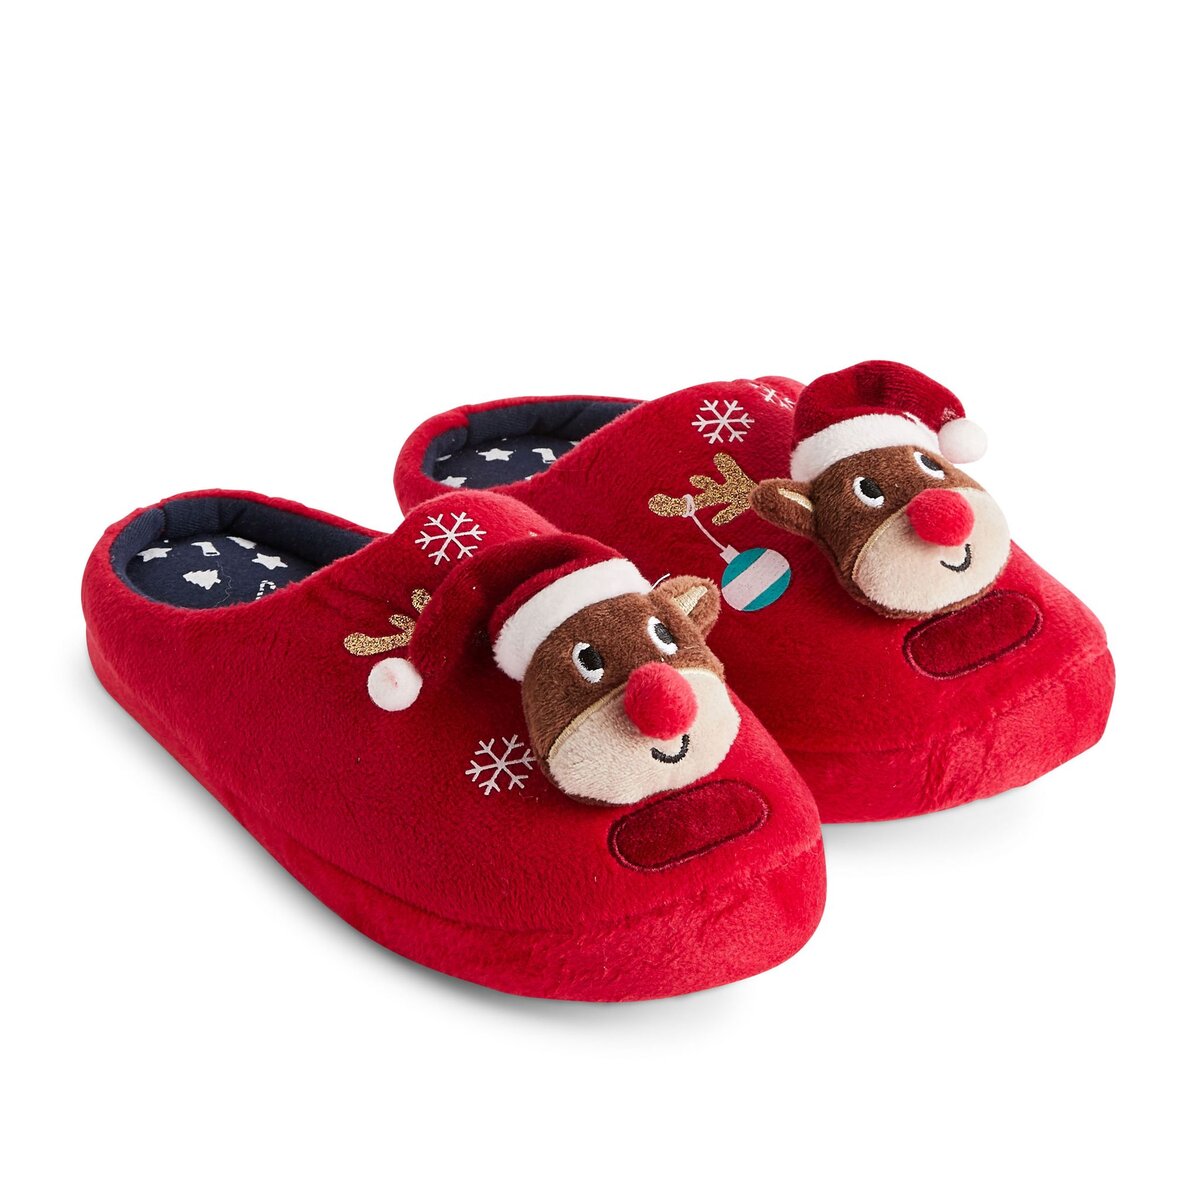 INEXTENSO Chaussons rennes enfant